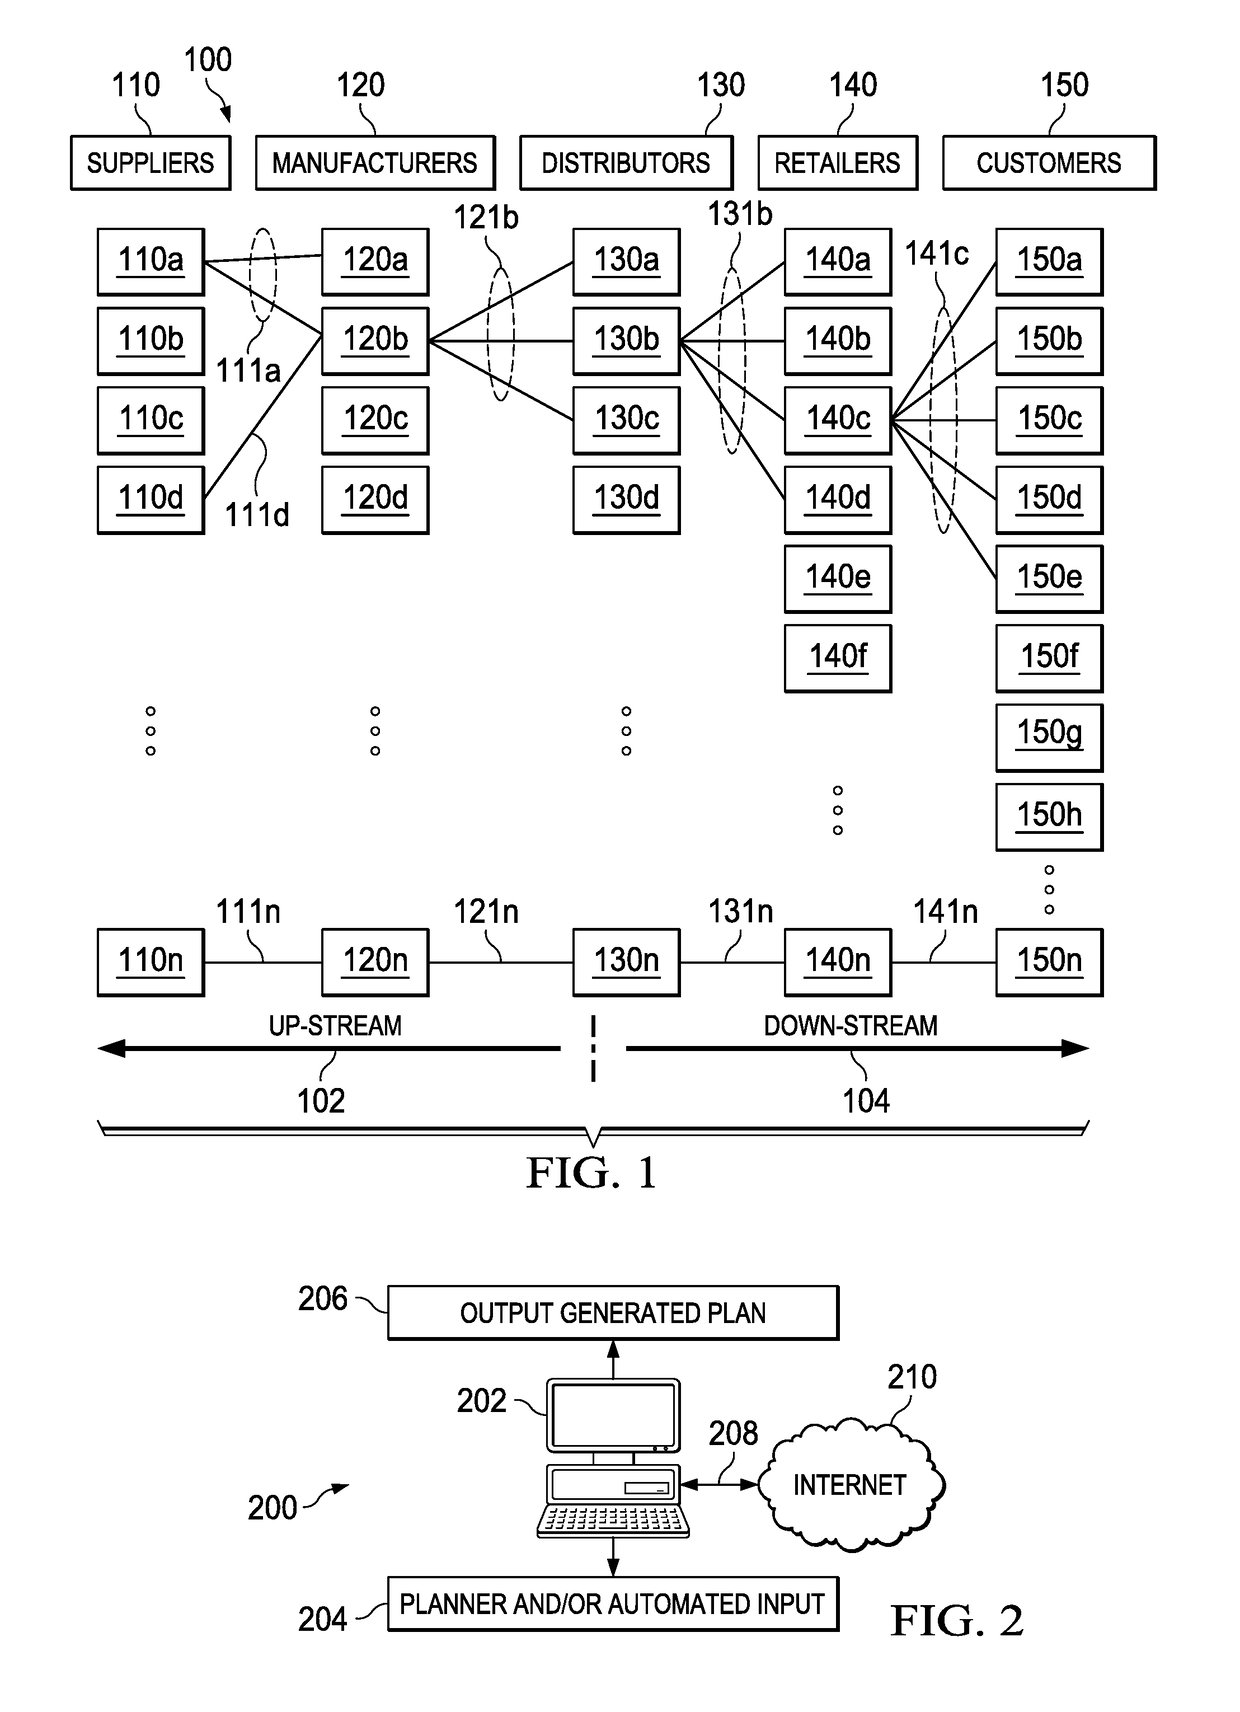 System and method for network visualization and plan review